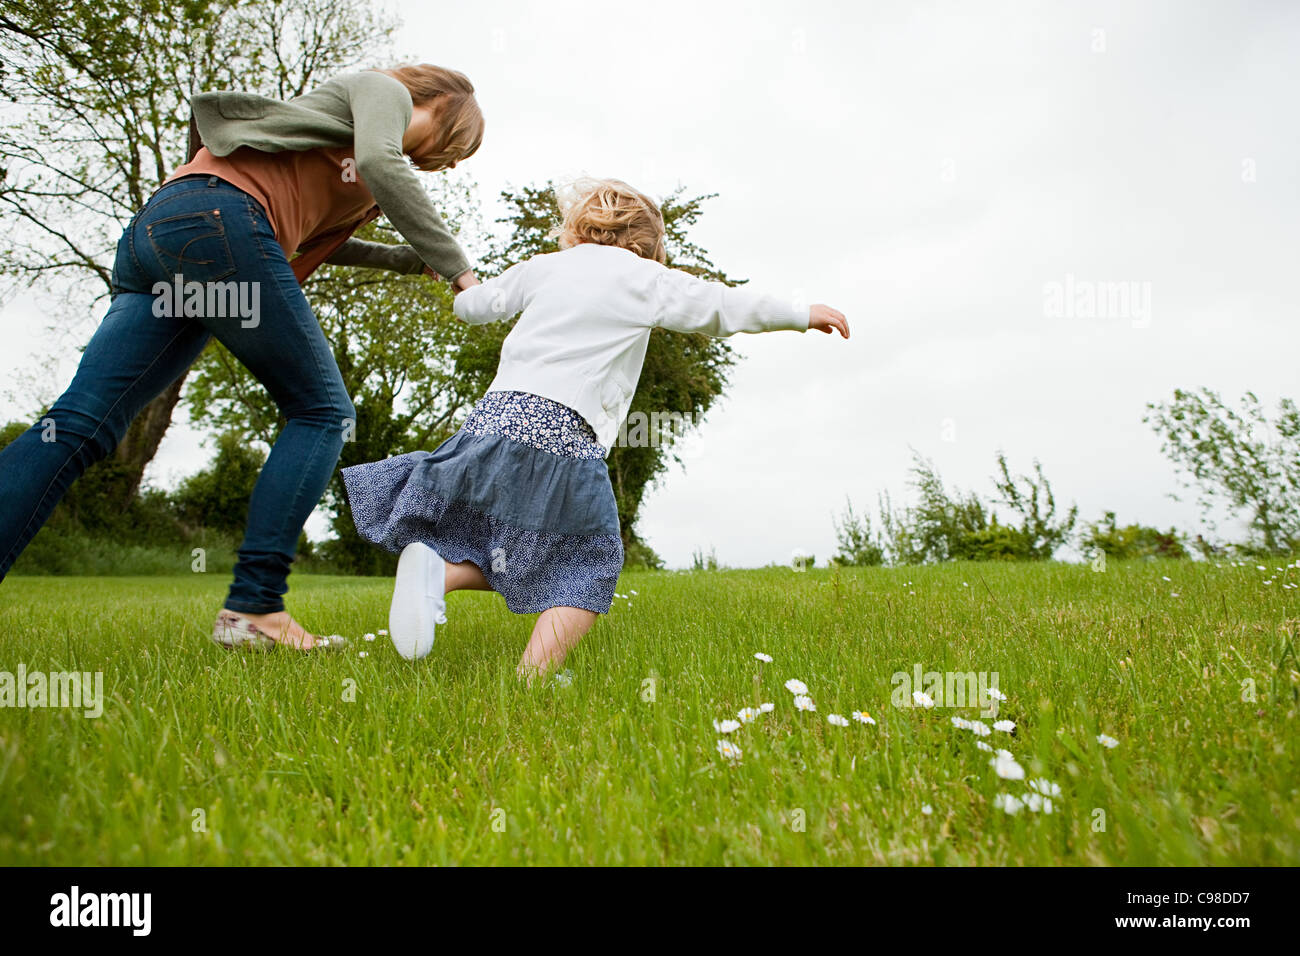 Mother and daughter running field Stock Photo